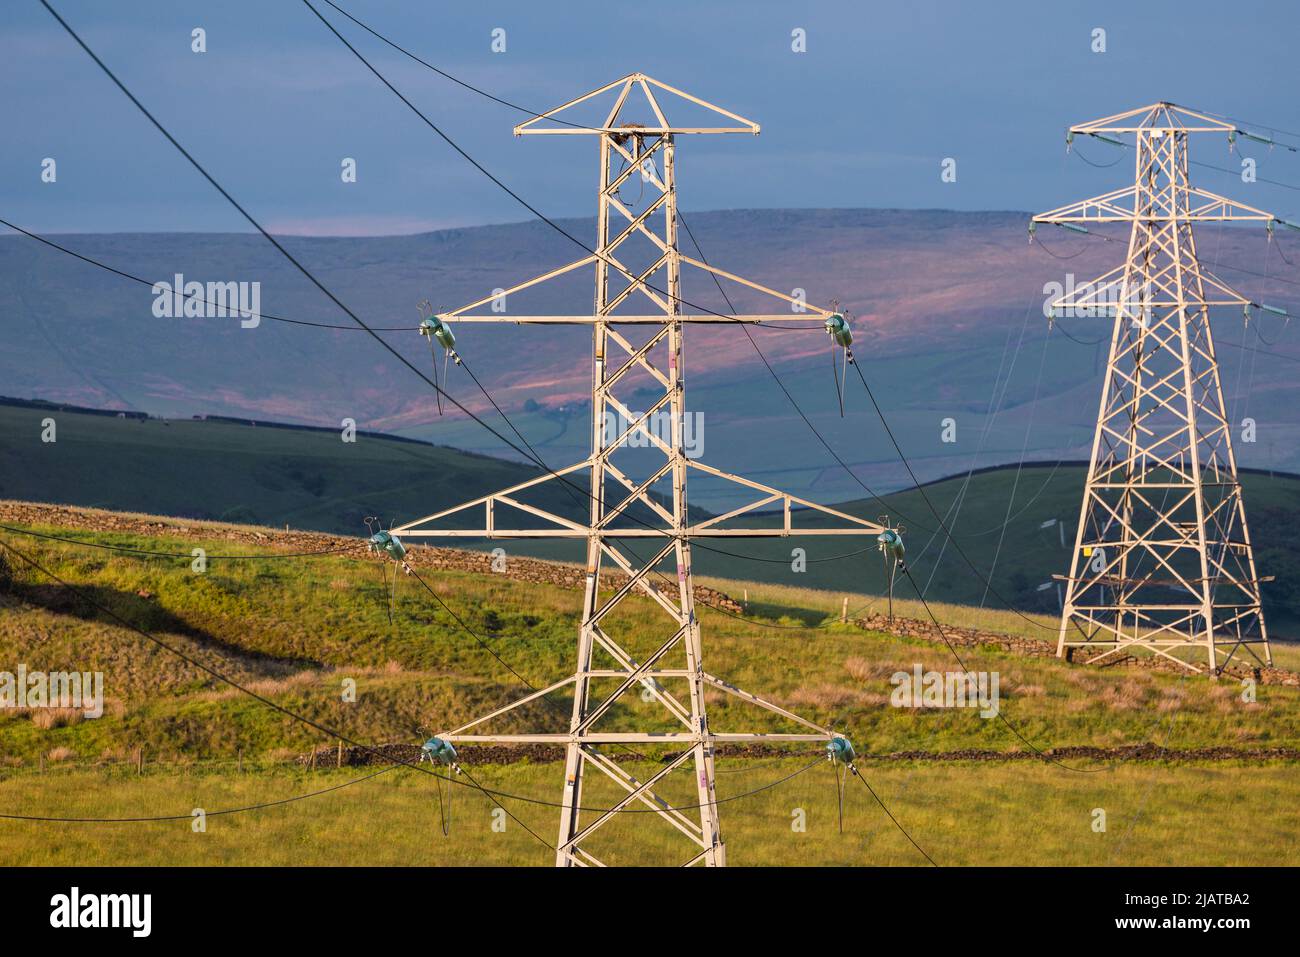 Electricity pylons in Bury countryside. Stock Photo